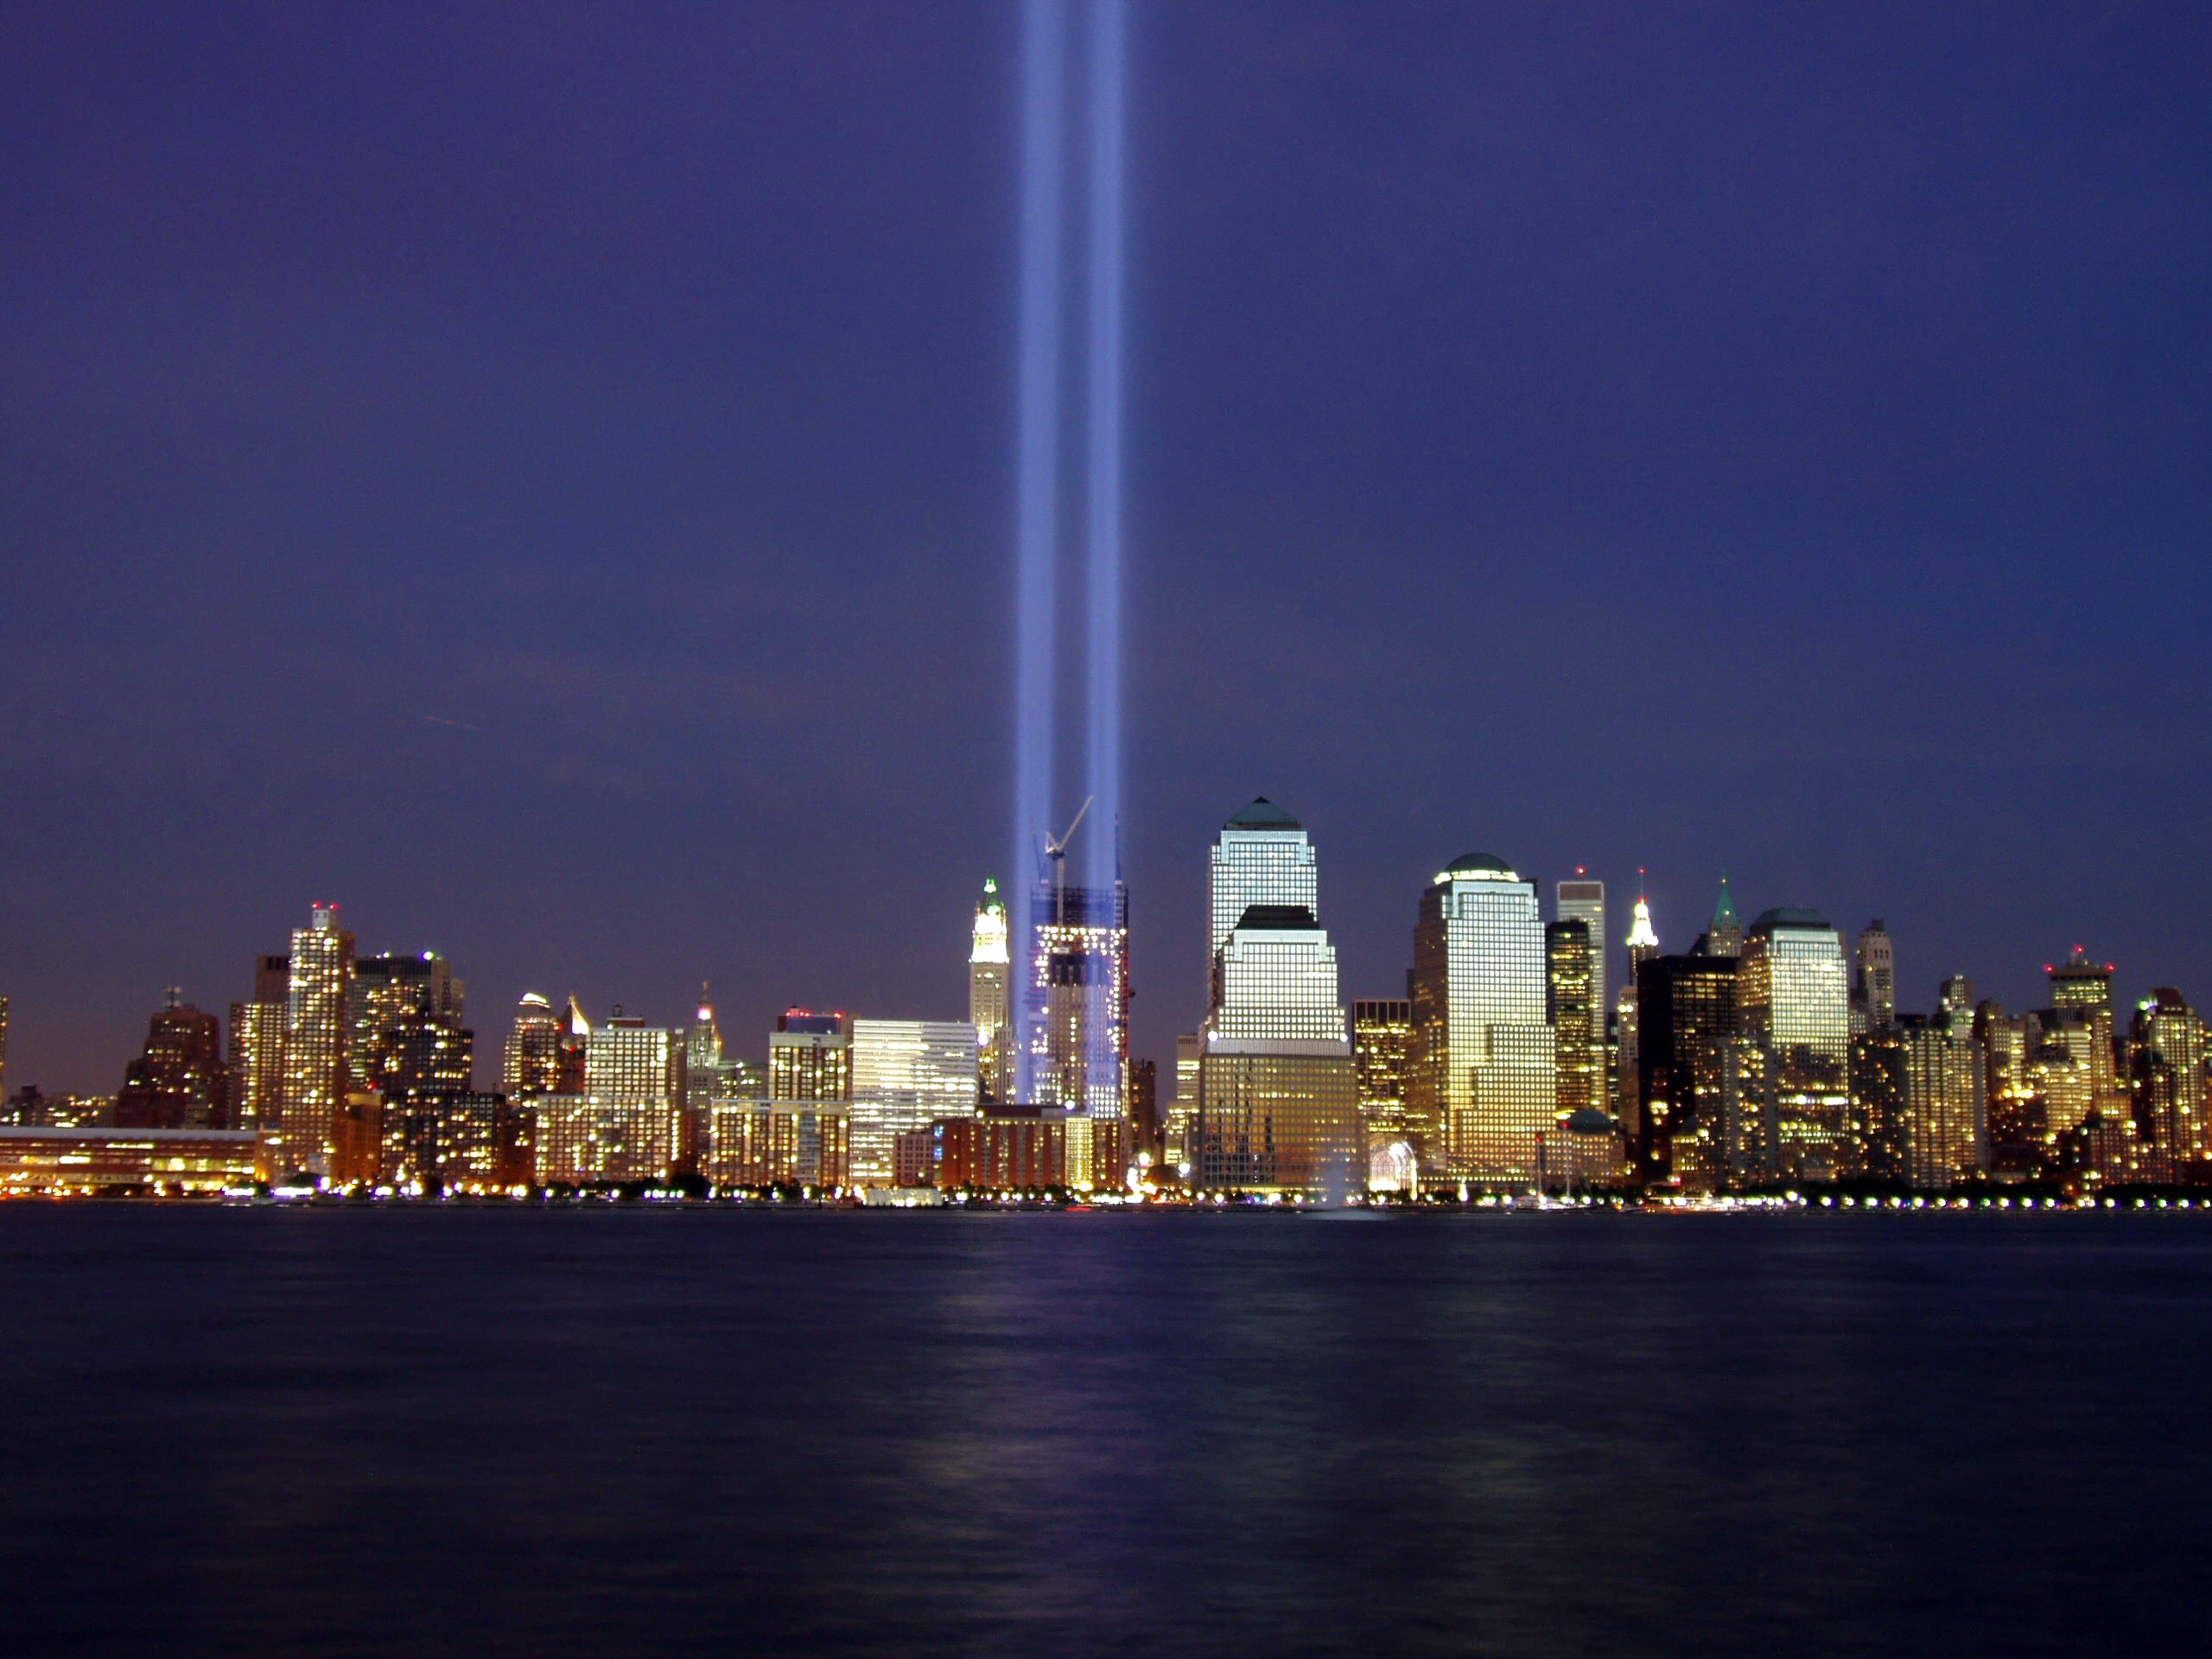 Two beams of light represent the former Twin Towers of the World Trade Center during the 2004 memorial of the September 11, 2001 attacks. Photo by Derek Jensen (Tysto), 2004-September-11